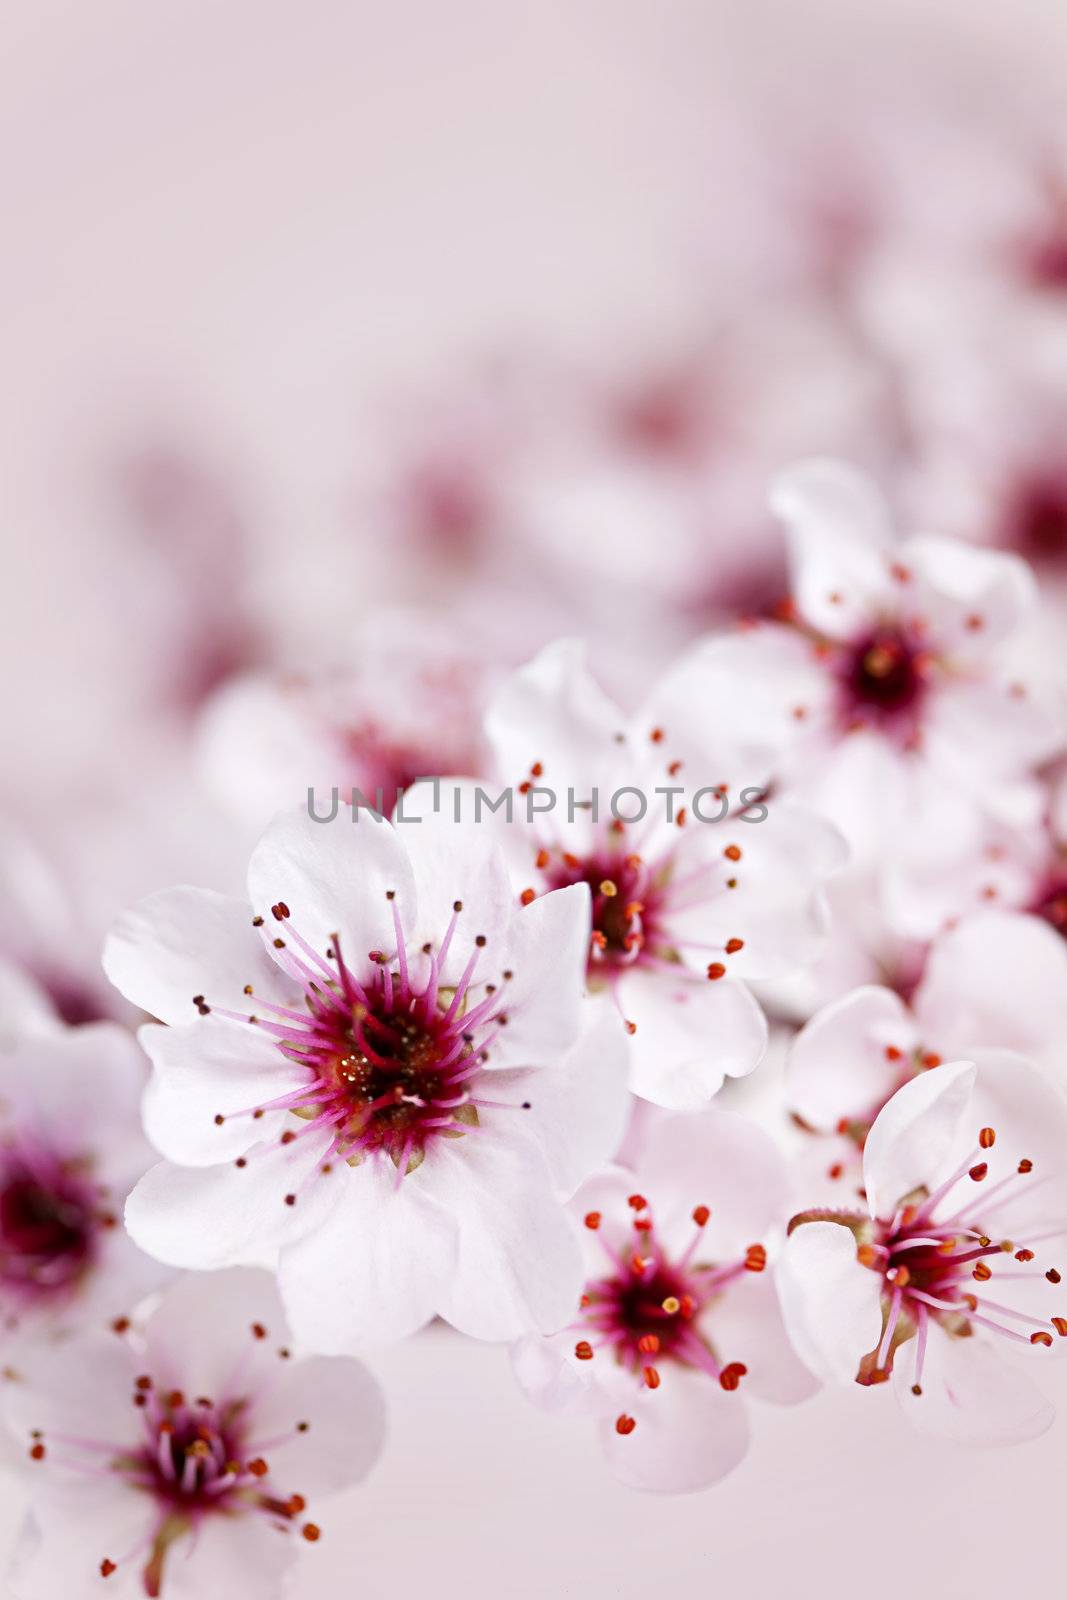 Cherry blossoms by elenathewise